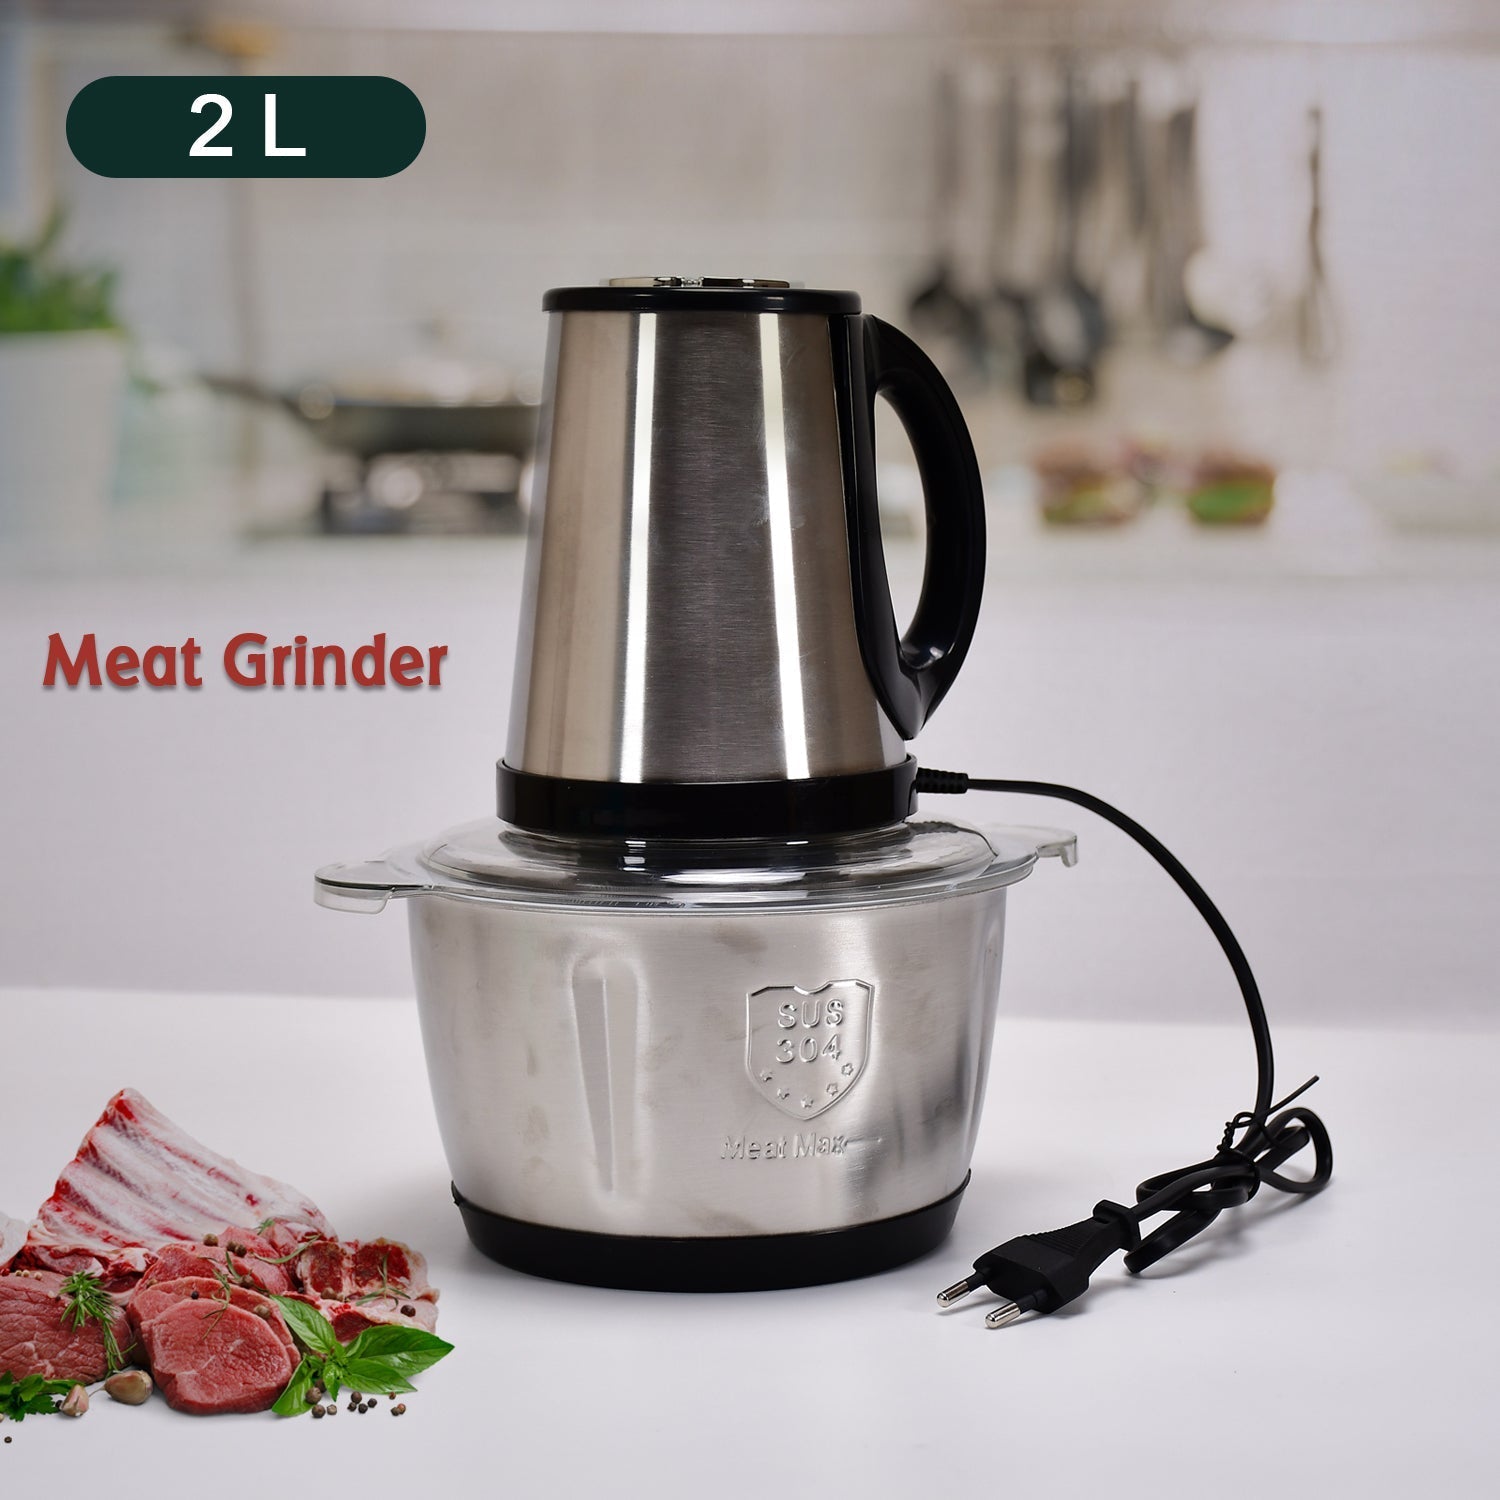 2362 STAINLESS STEEL ELECTRIC MEAT GRINDERS WITH BOWL HEAVY FOR KITCHEN FOOD CHOPPER, MEAT, VEGETABLES, ONION , GARLIC SLICER DICER, FRUIT & NUTS BLENDER (2L, 250WATTS) DeoDap